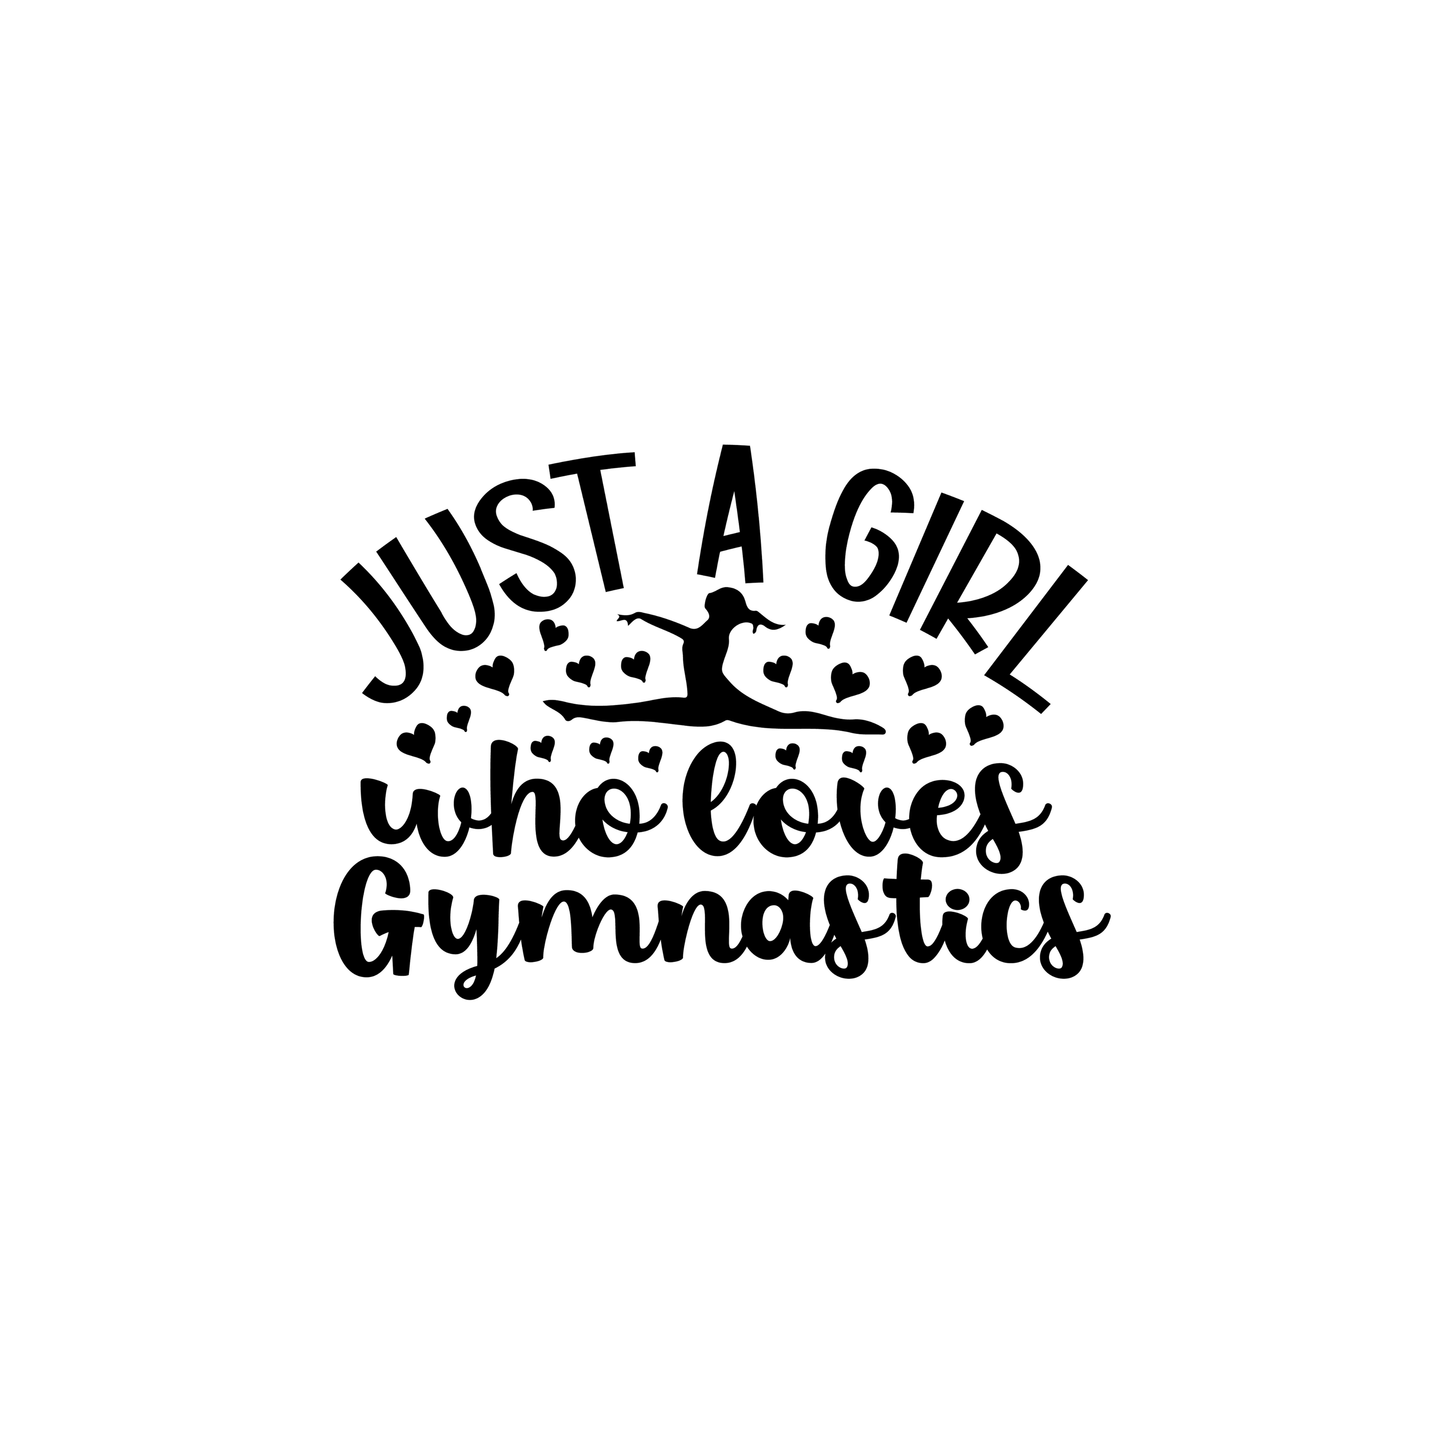 Just a Girl Who Loves Gymnastics Print - High Definition